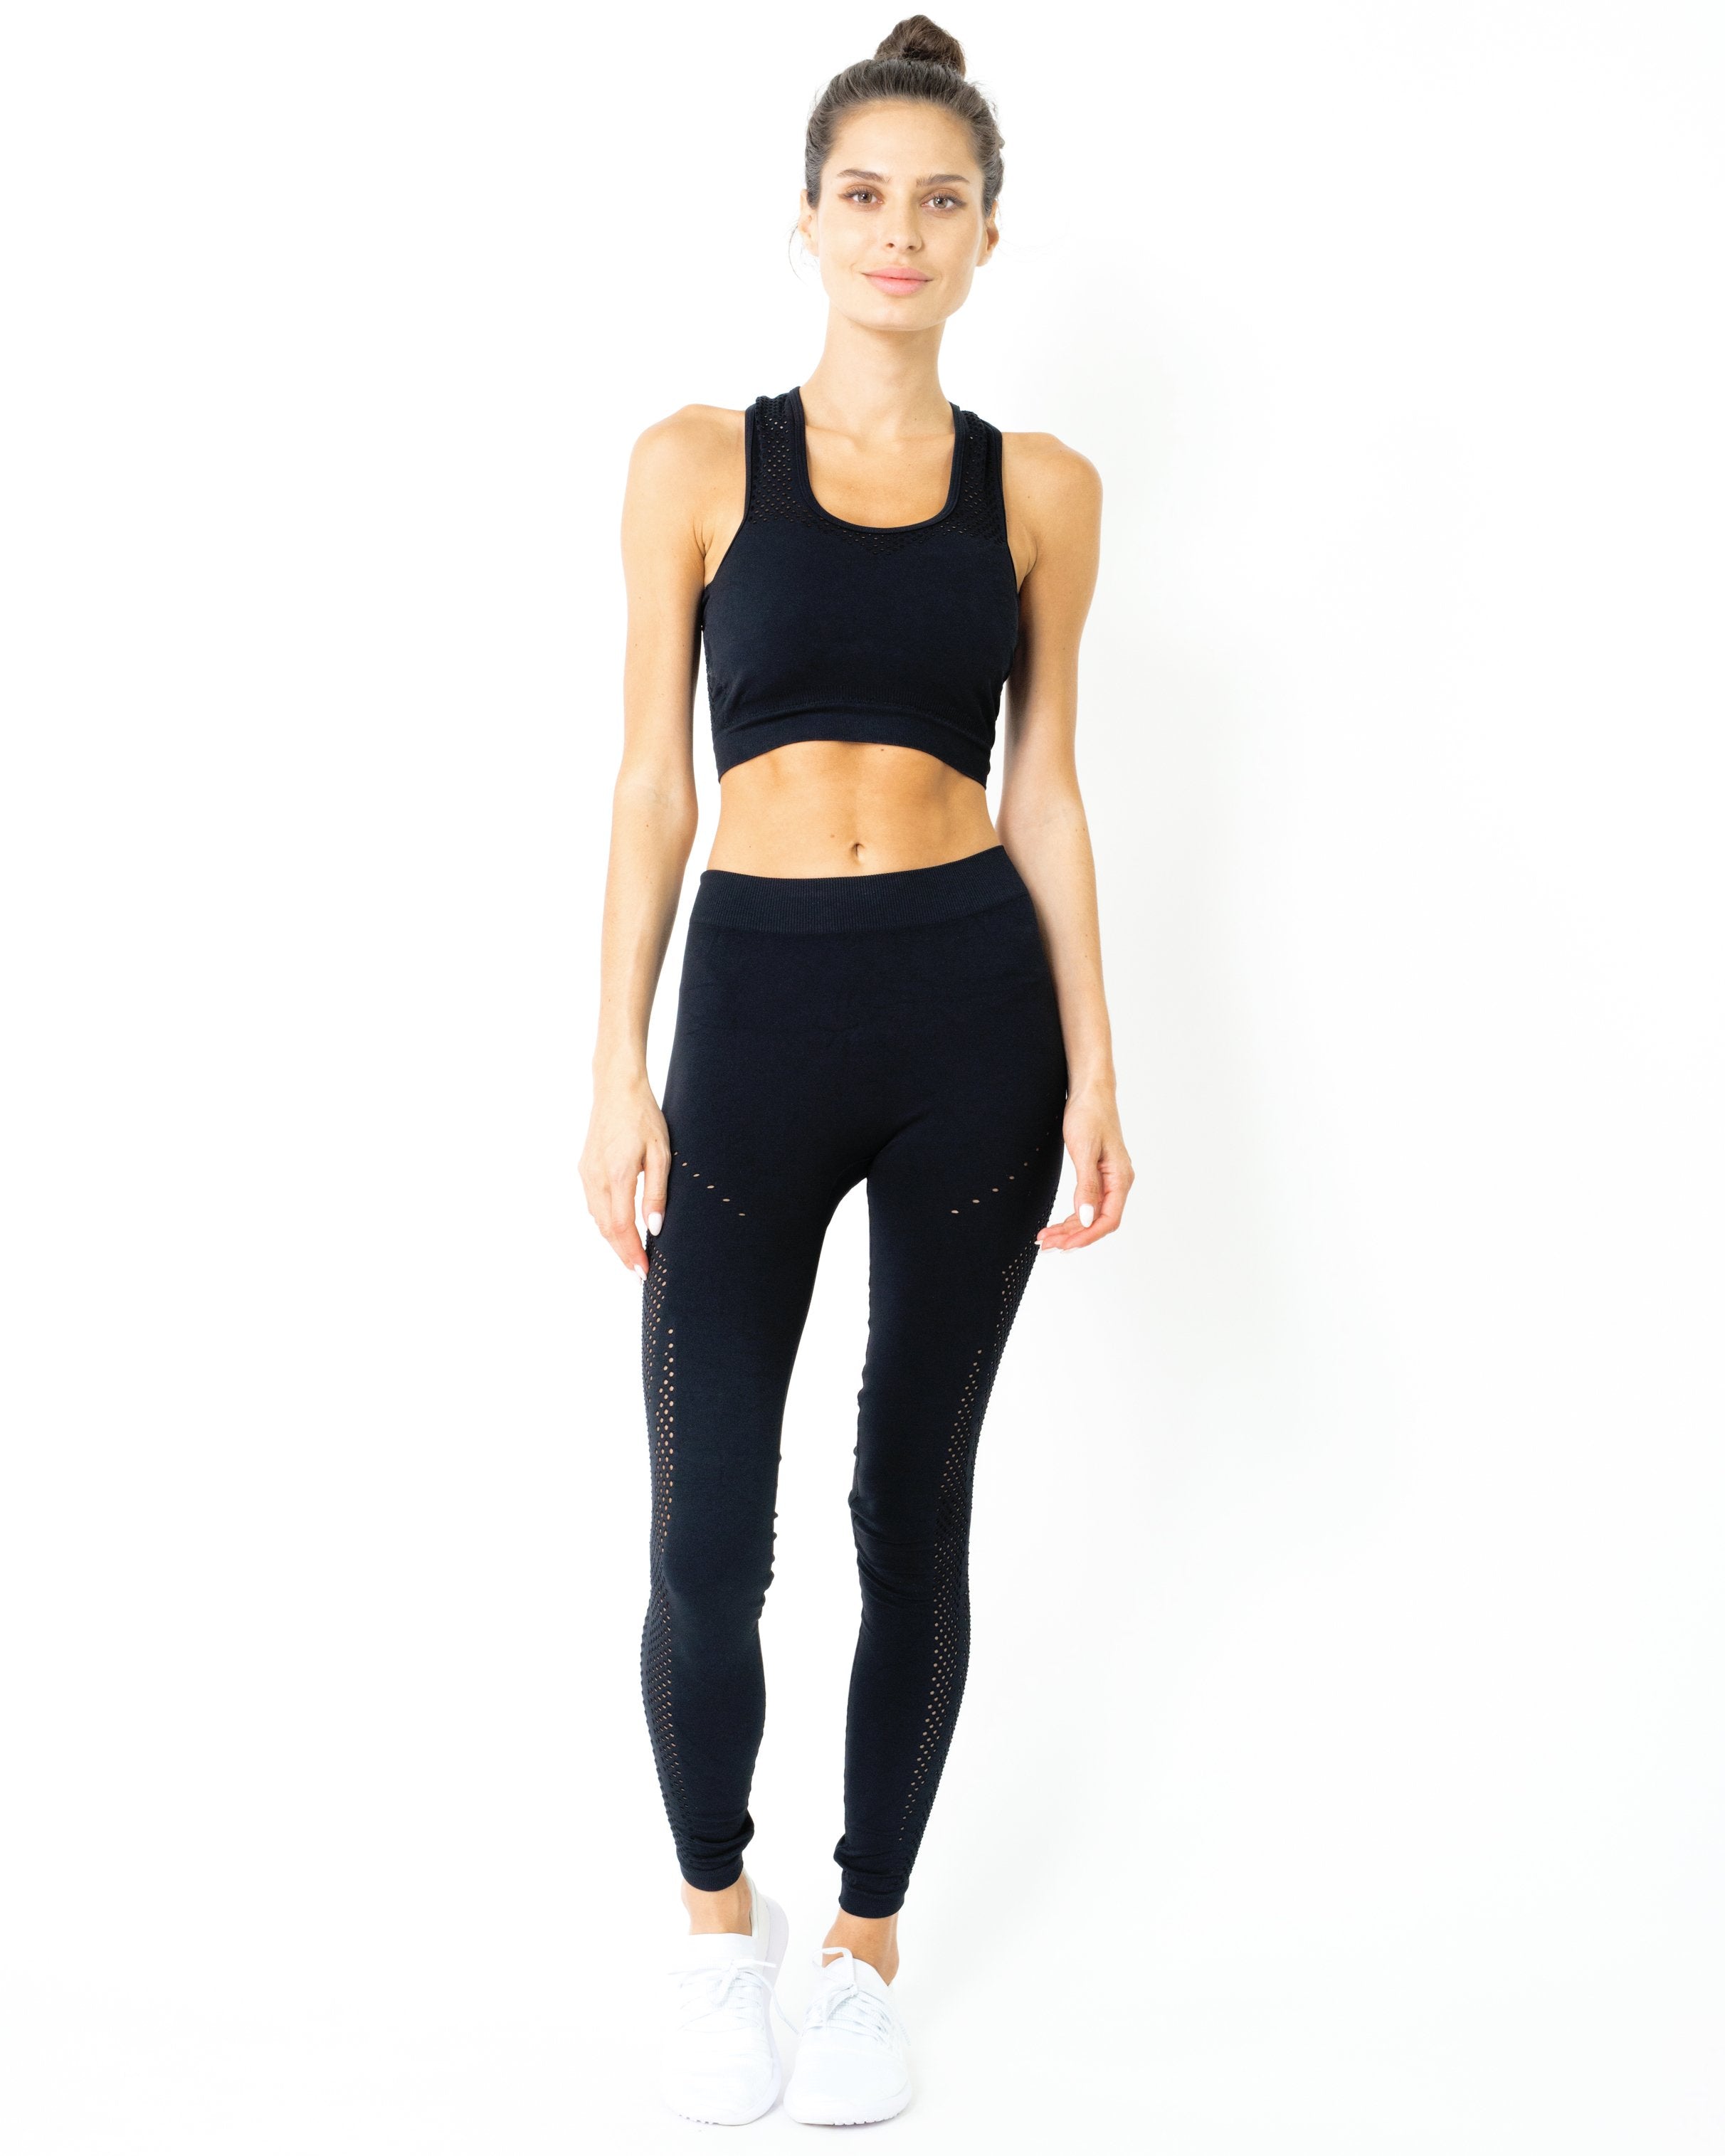 SALE! 50% OFF! Milano Seamless Legging - Black [MADE IN ITALY]